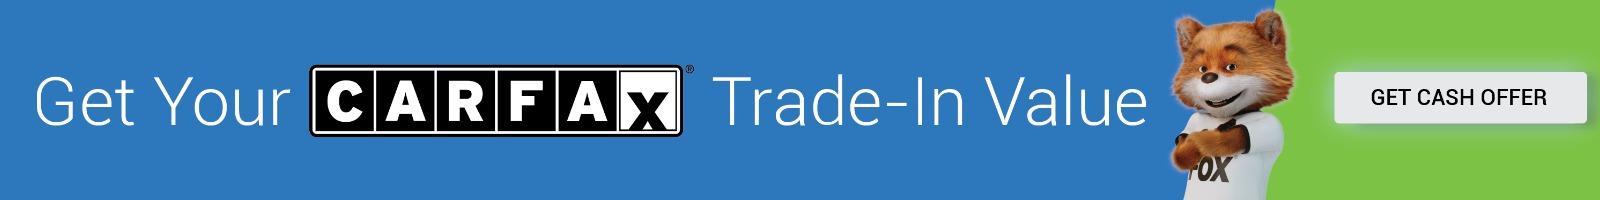 Get your trade in value | Banner